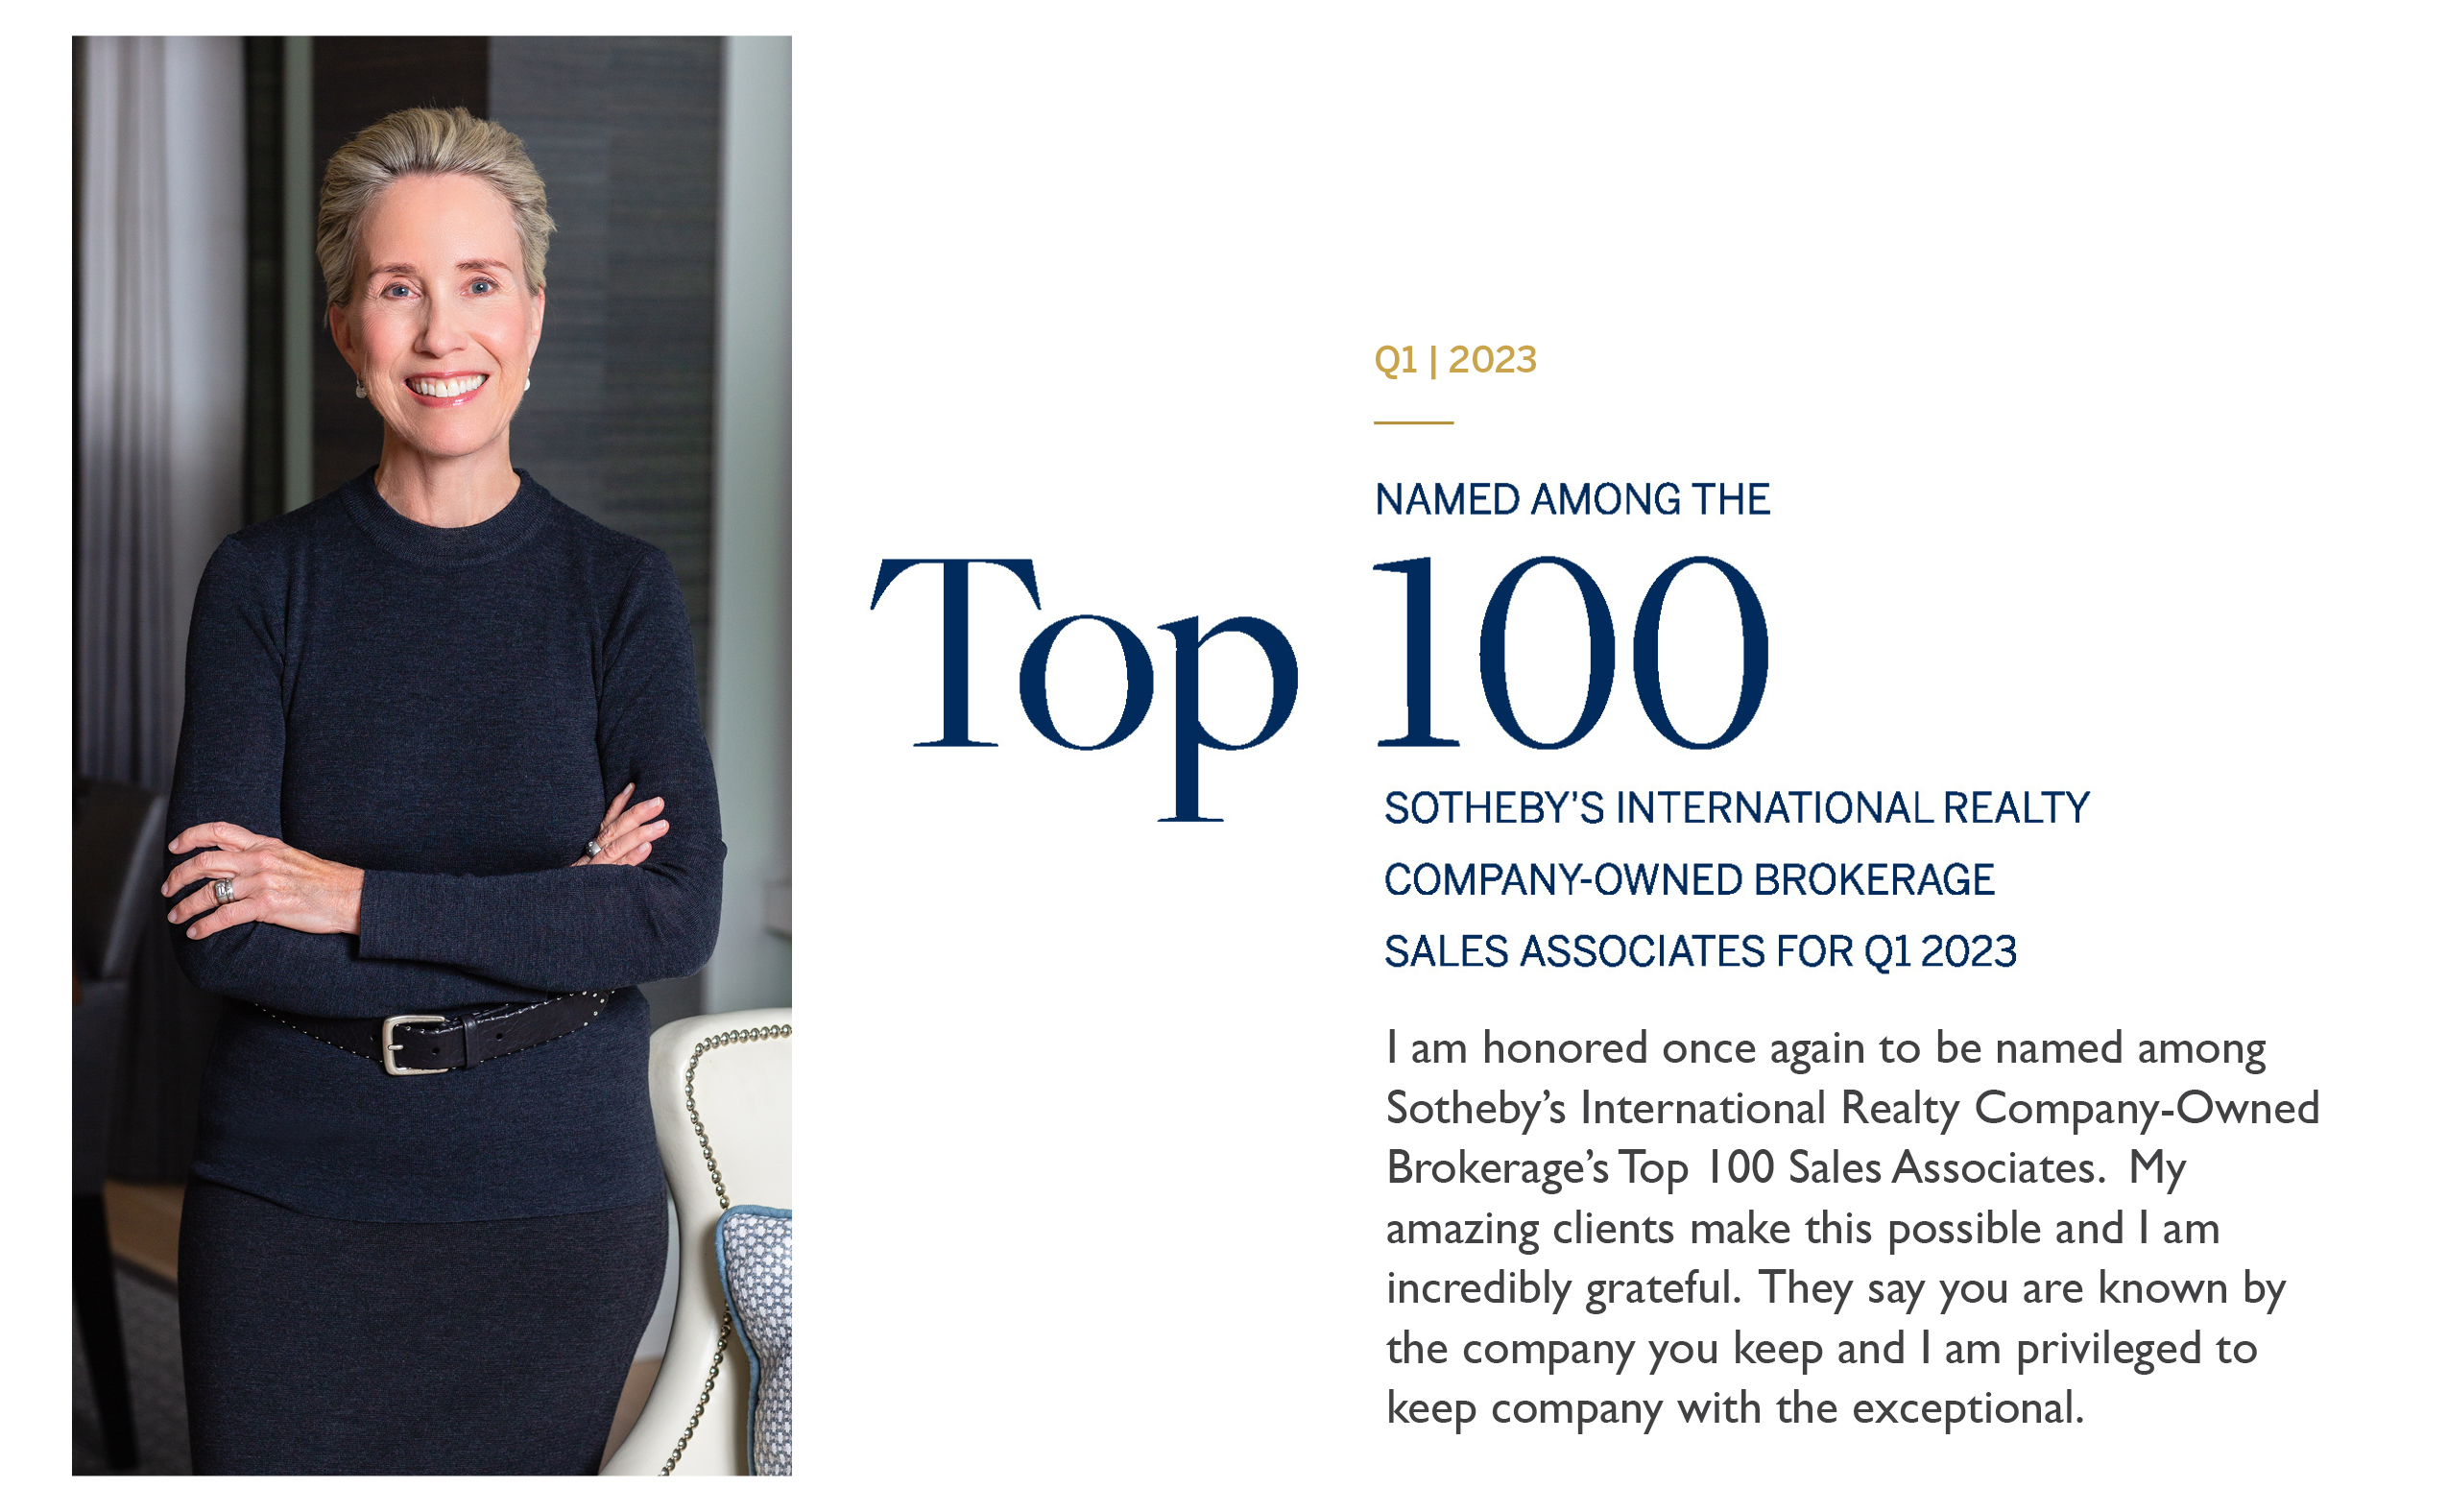 Rebecca named to Sotheby's "Top 100" for Q1 | 2023